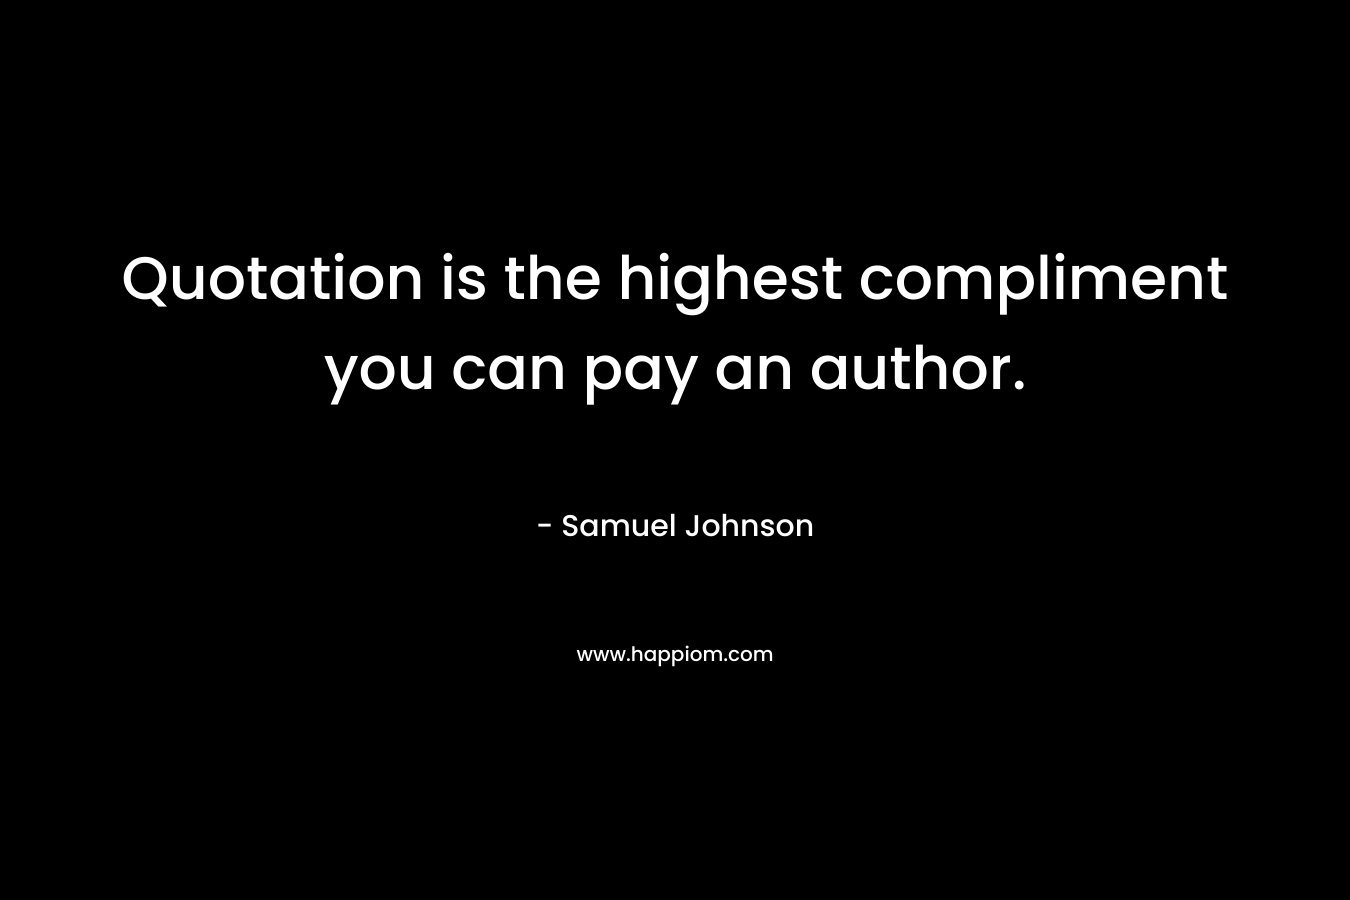 Quotation is the highest compliment you can pay an author. – Samuel Johnson